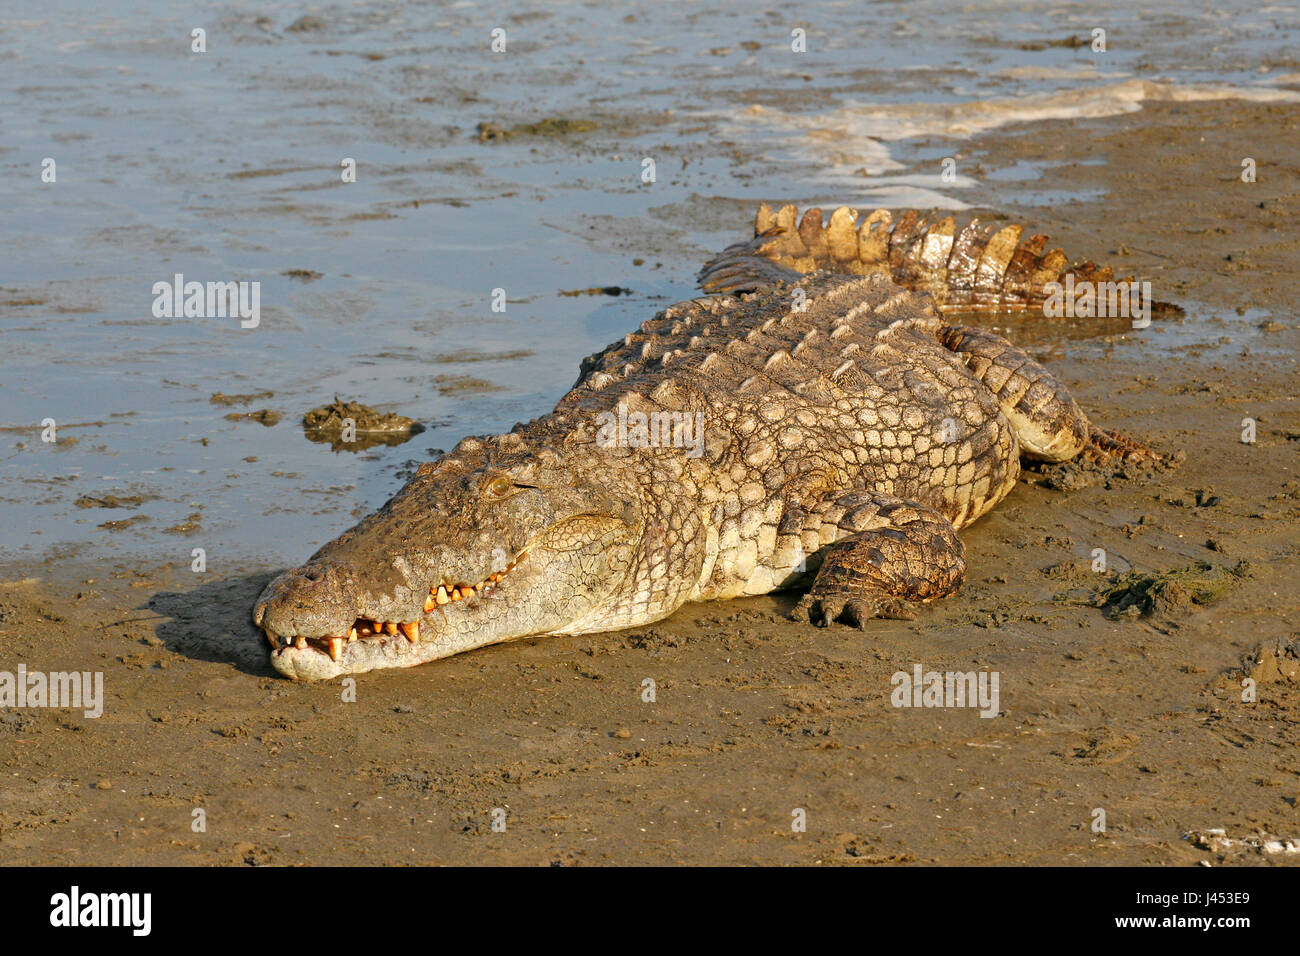 photo of a large nile crocodile lying at the edge of the water Stock Photo